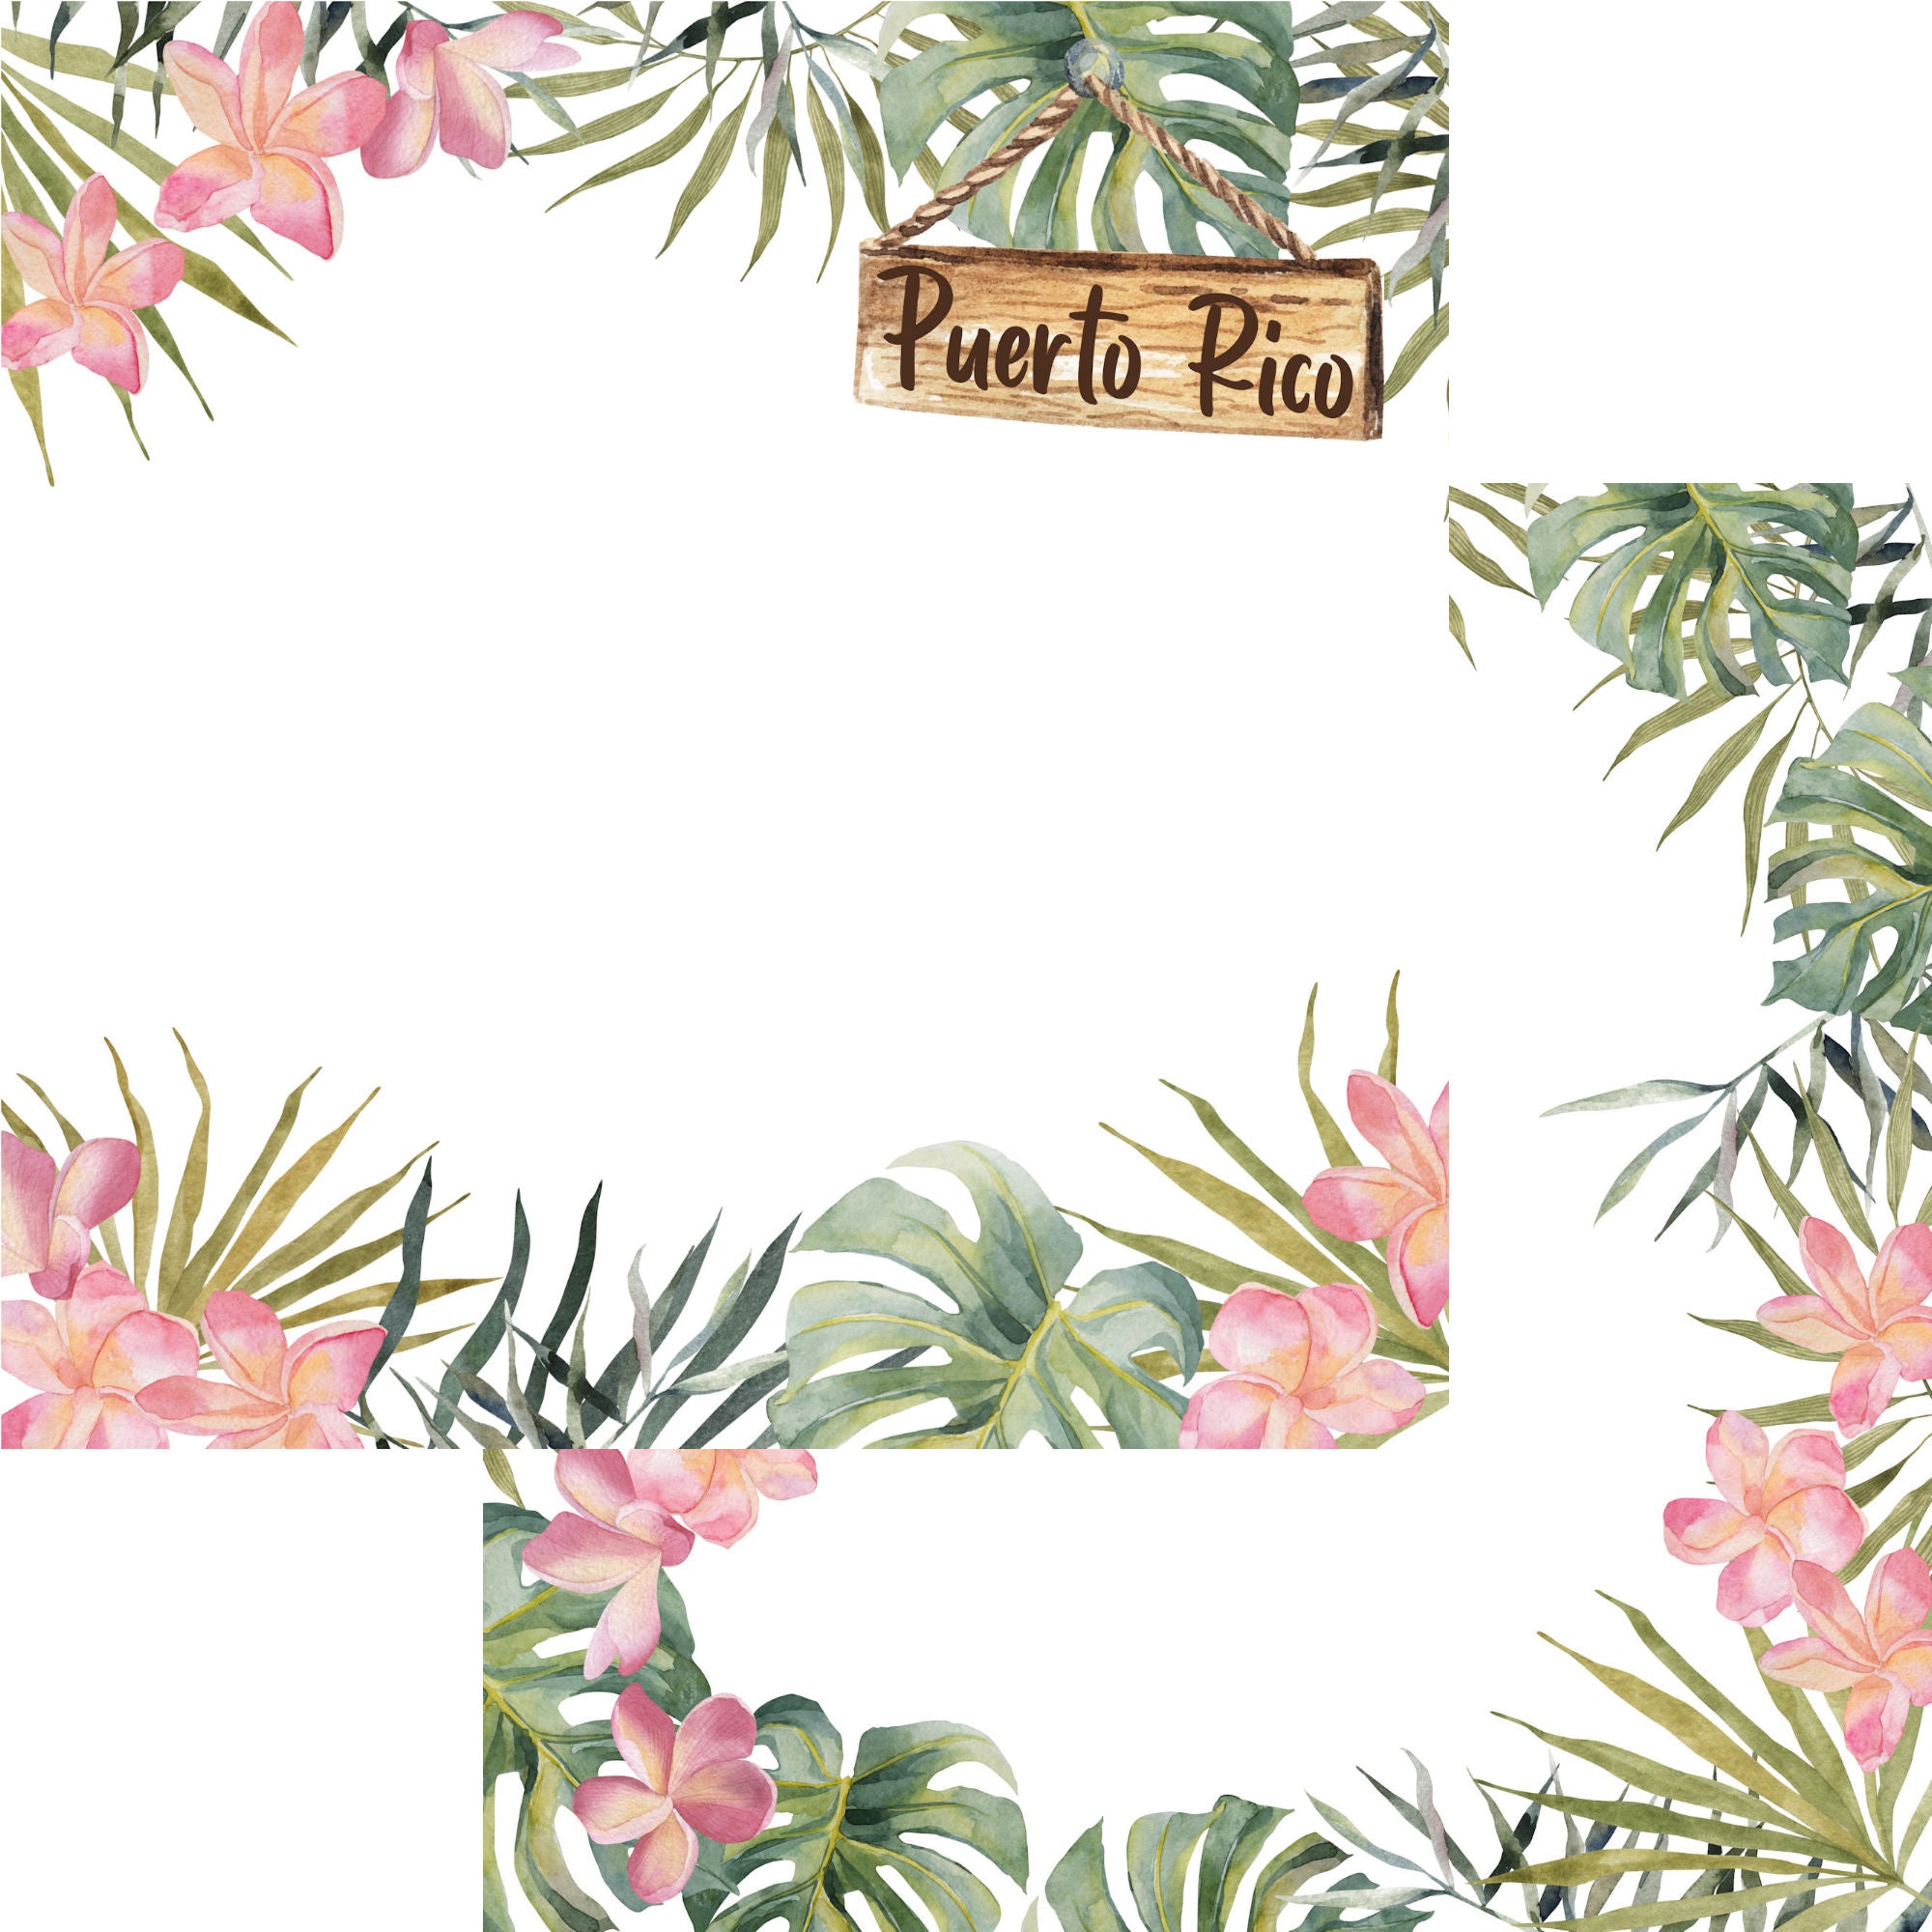 Tropical Paradise Collection Puerto Rico 12 x 12 Double-Sided Scrapbook Paper by SSC Designs